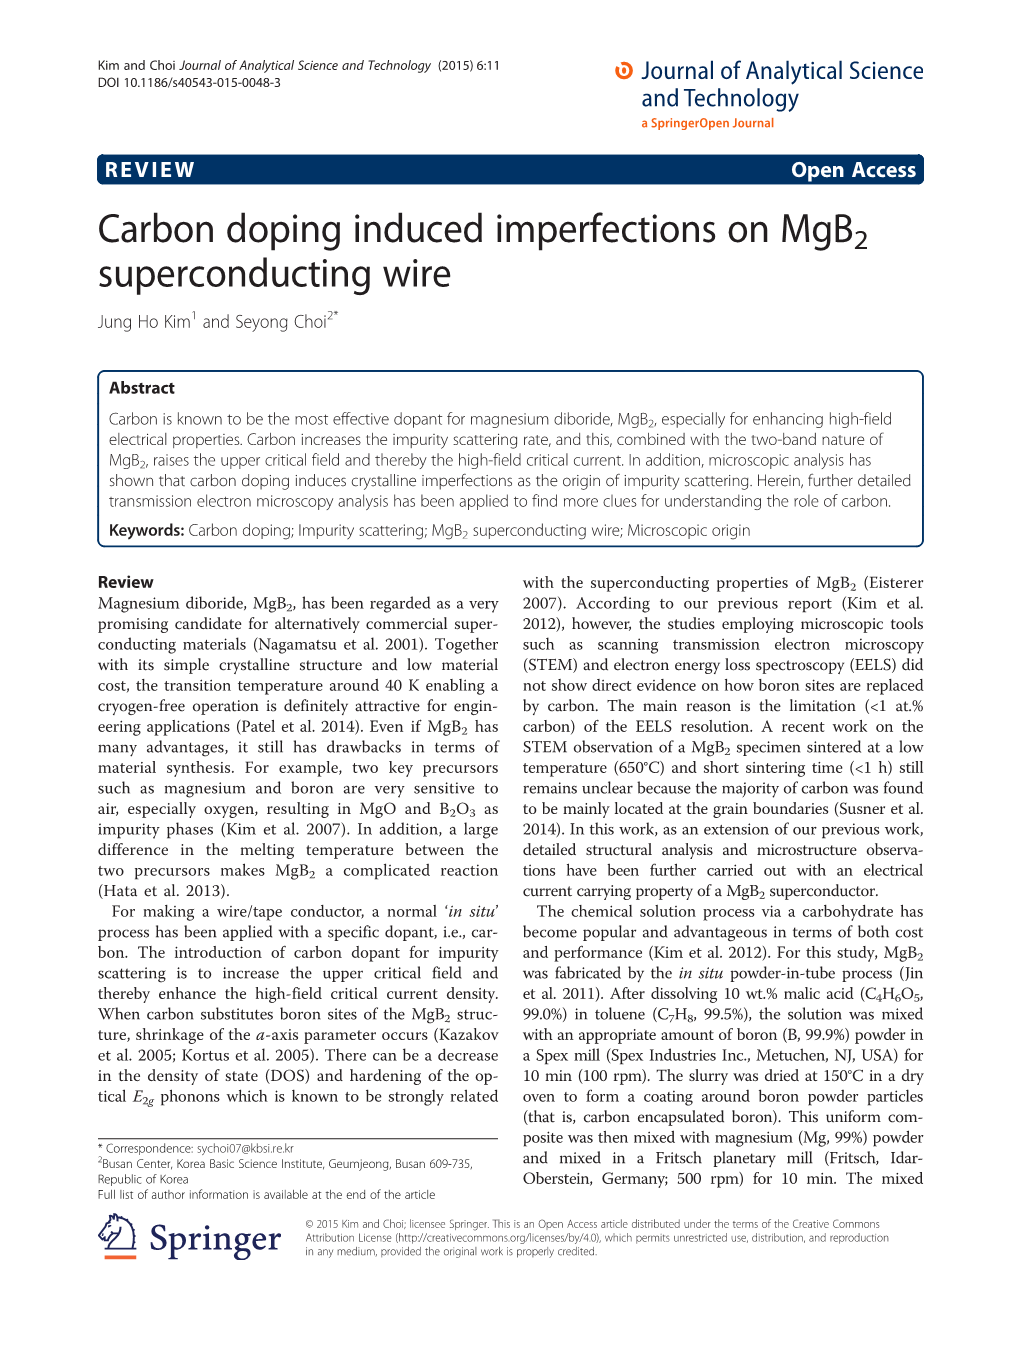 Carbon Doping Induced Imperfections on Mgb2 Superconducting Wire Jung Ho Kim1 and Seyong Choi2*